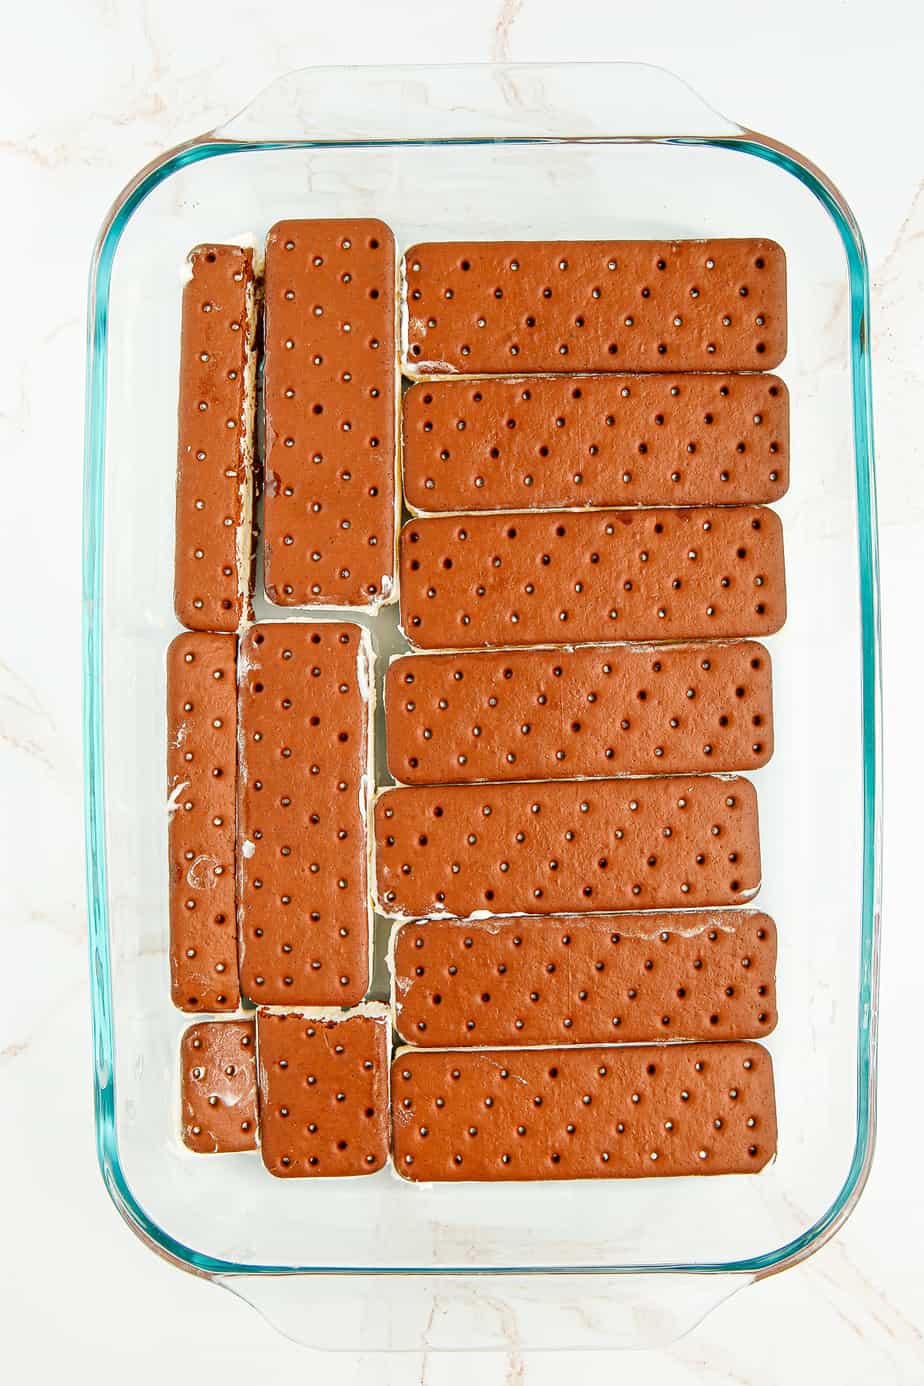 Ice cream sandwiches laid in a rectangular pan with some ice cream sandwiches sliced to fit in an even level in the pan from overhead.